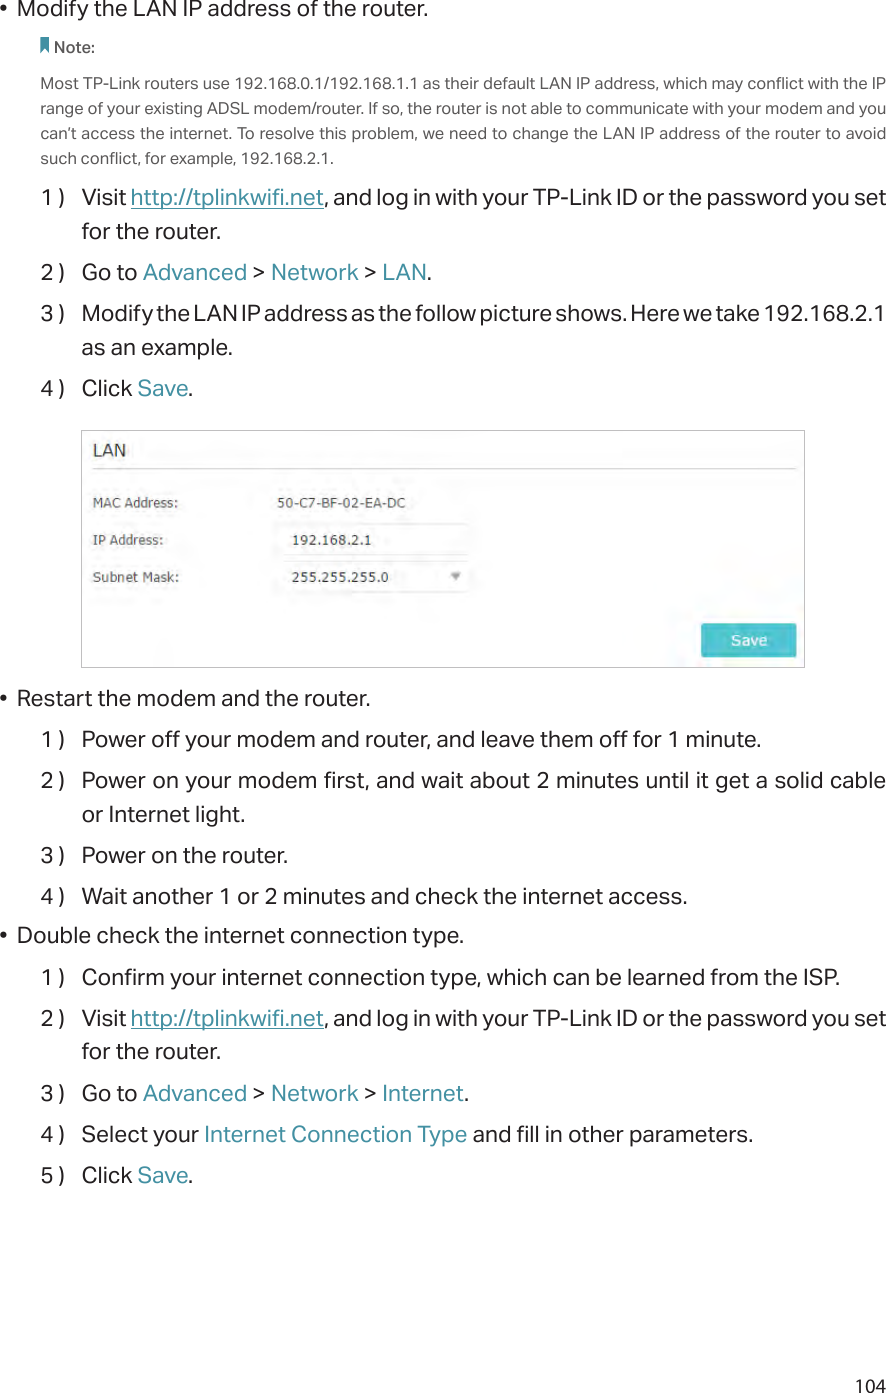 104•  Modify the LAN IP address of the router.Note: Most TP-Link routers use 192.168.0.1/192.168.1.1 as their default LAN IP address, which may conflict with the IP range of your existing ADSL modem/router. If so, the router is not able to communicate with your modem and you can’t access the internet. To resolve this problem, we need to change the LAN IP address of the router to avoid such conflict, for example, 192.168.2.1. 1 )  Visit http://tplinkwifi.net, and log in with your TP-Link ID or the password you set for the router.2 )  Go to Advanced &gt; Network &gt; LAN.3 )  Modify the LAN IP address as the follow picture shows. Here we take 192.168.2.1 as an example.4 )  Click Save.•  Restart the modem and the router.1 )  Power off your modem and router, and leave them off for 1 minute.2 )  Power on your modem first, and wait about 2 minutes until it get a solid cable or Internet light.3 )  Power on the router.4 )  Wait another 1 or 2 minutes and check the internet access.•  Double check the internet connection type.1 )  Confirm your internet connection type, which can be learned from the ISP.2 )  Visit http://tplinkwifi.net, and log in with your TP-Link ID or the password you set for the router.3 )  Go to Advanced &gt; Network &gt; Internet.4 )  Select your Internet Connection Type and fill in other parameters.5 )  Click Save.